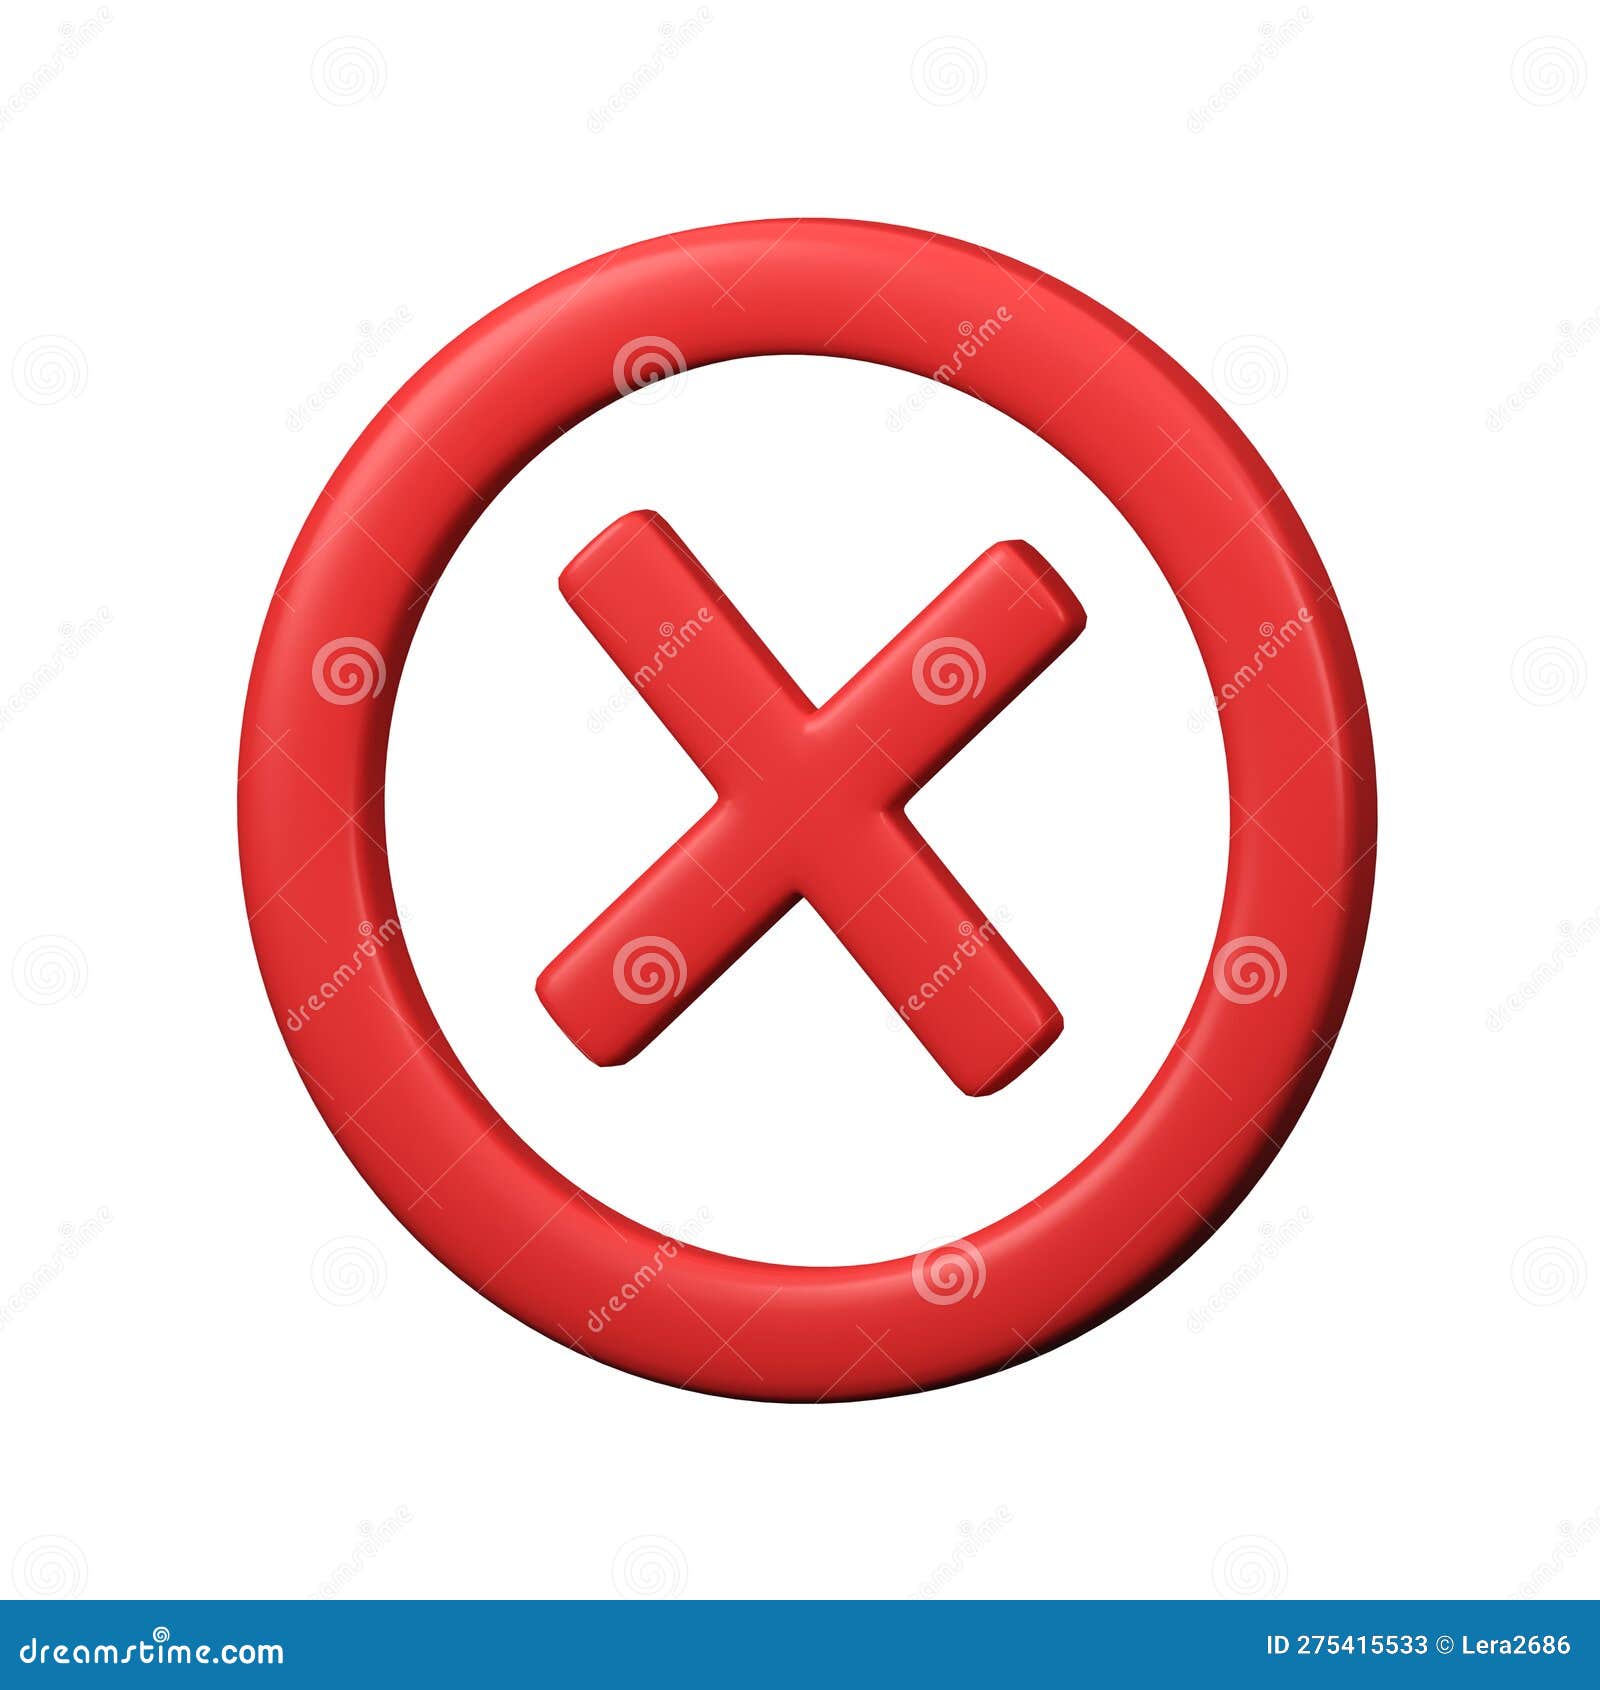 3D Wrong Button in Circle Shape. Red No or Incorrect Sign Render. Red ...